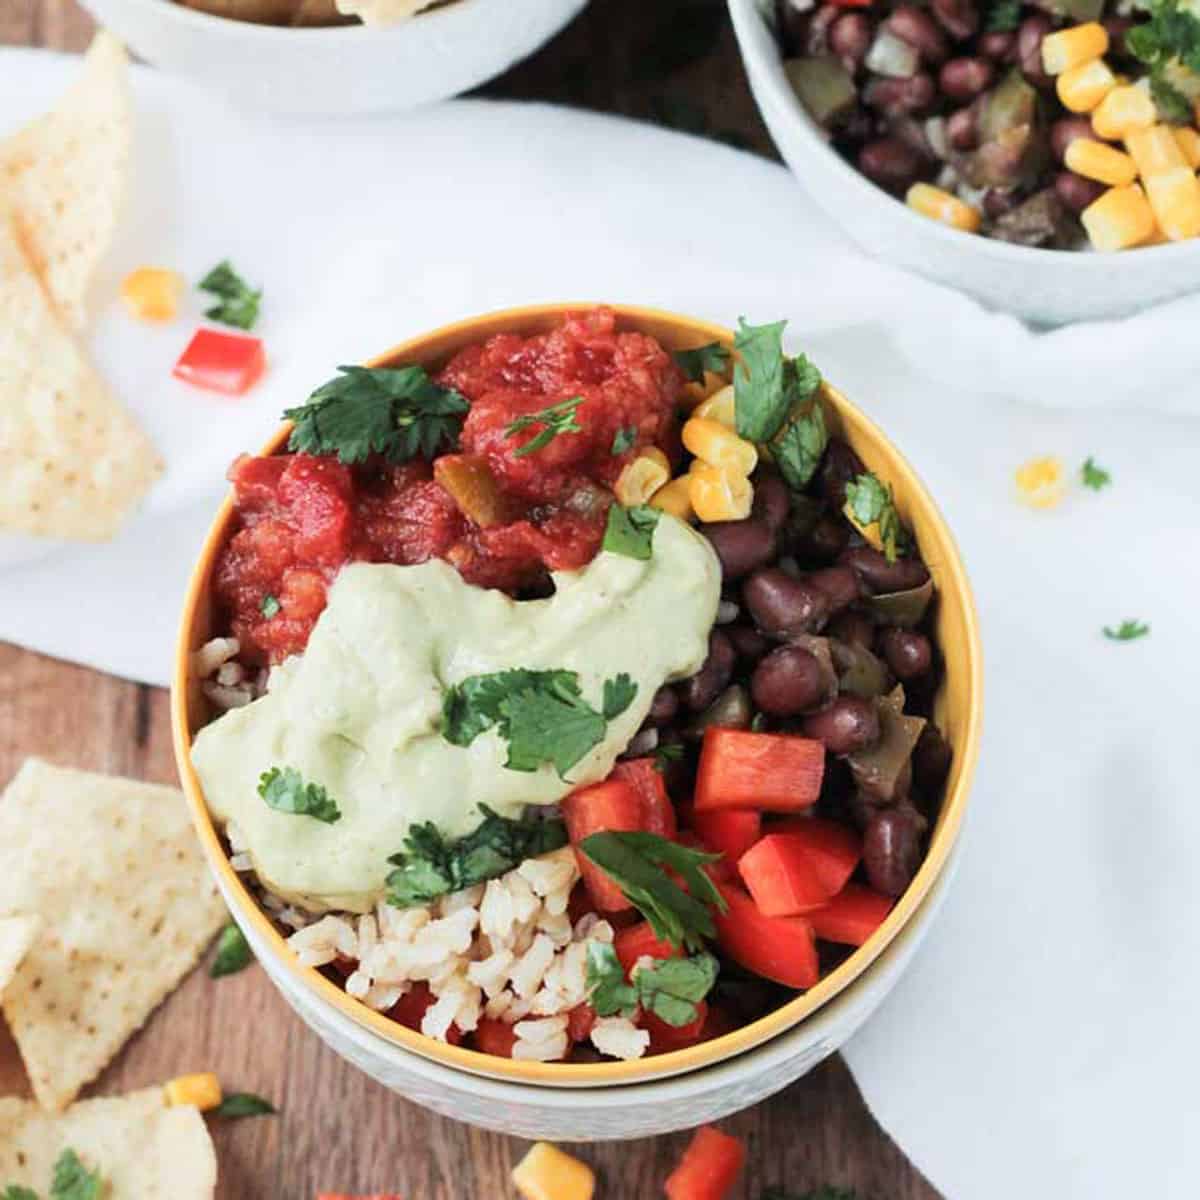 Rice, black beans, peppers, corn, salsa, and avocado sauce in a bowl